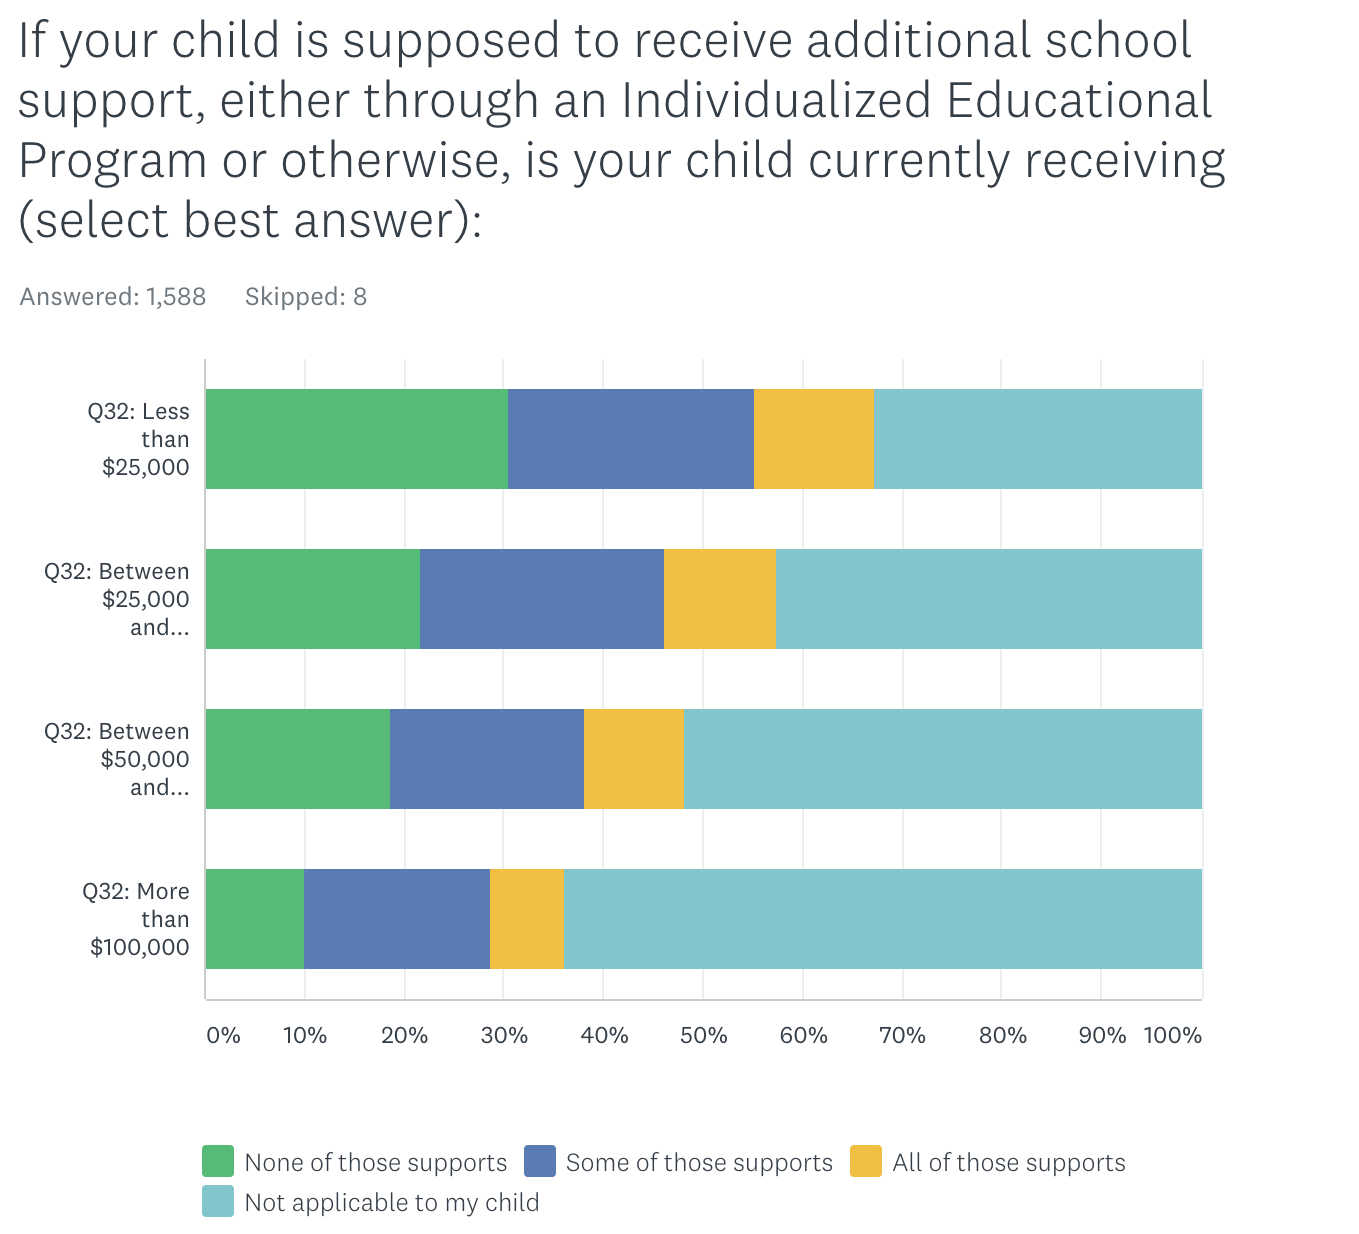 39% of parents of kids with IEPs say they are not receiving any support at all.